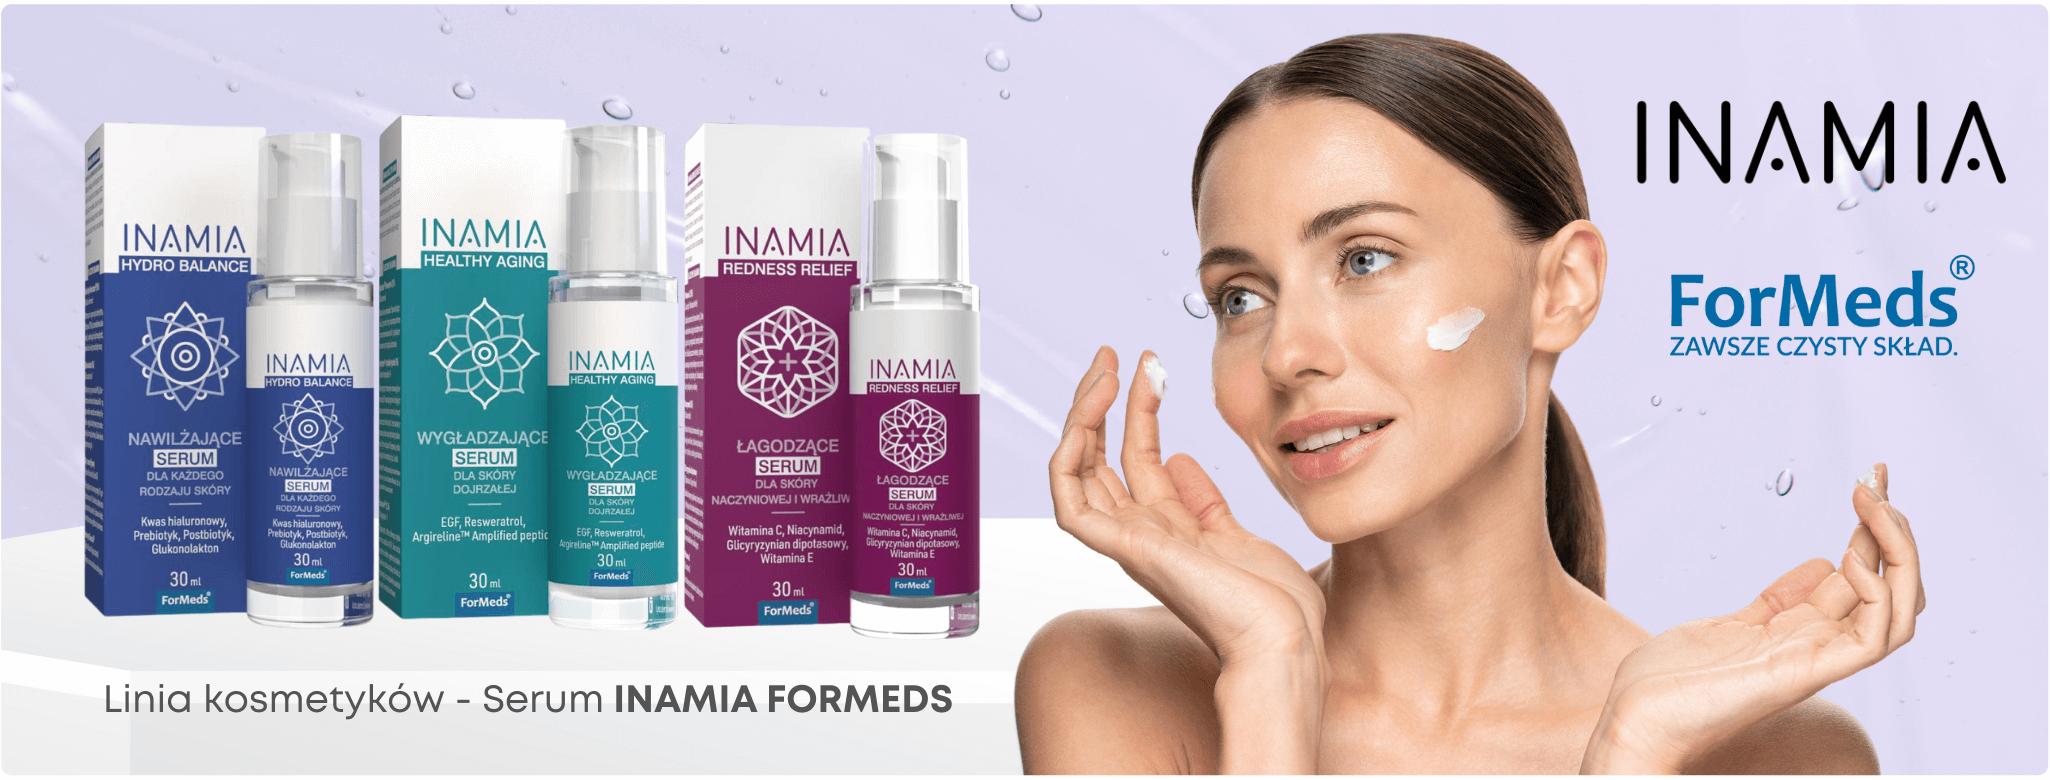 Inamia Serum Formeds